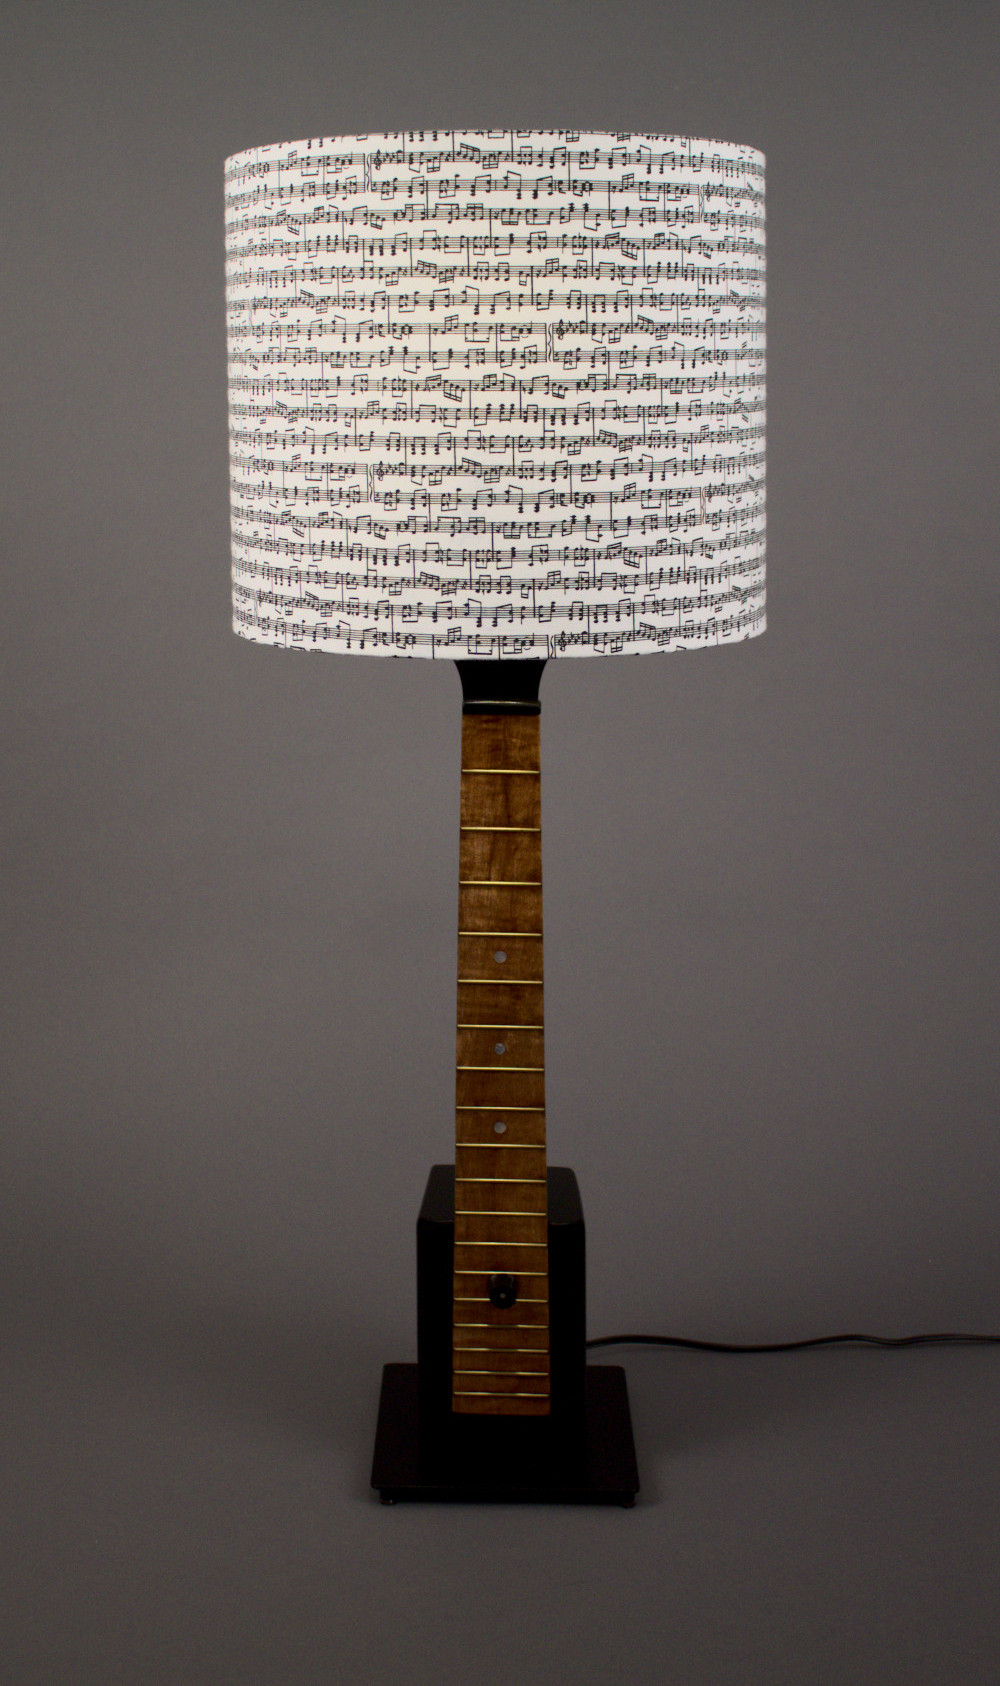 An Art Lamp from an old guitar neck – Bill Paine Art and Music